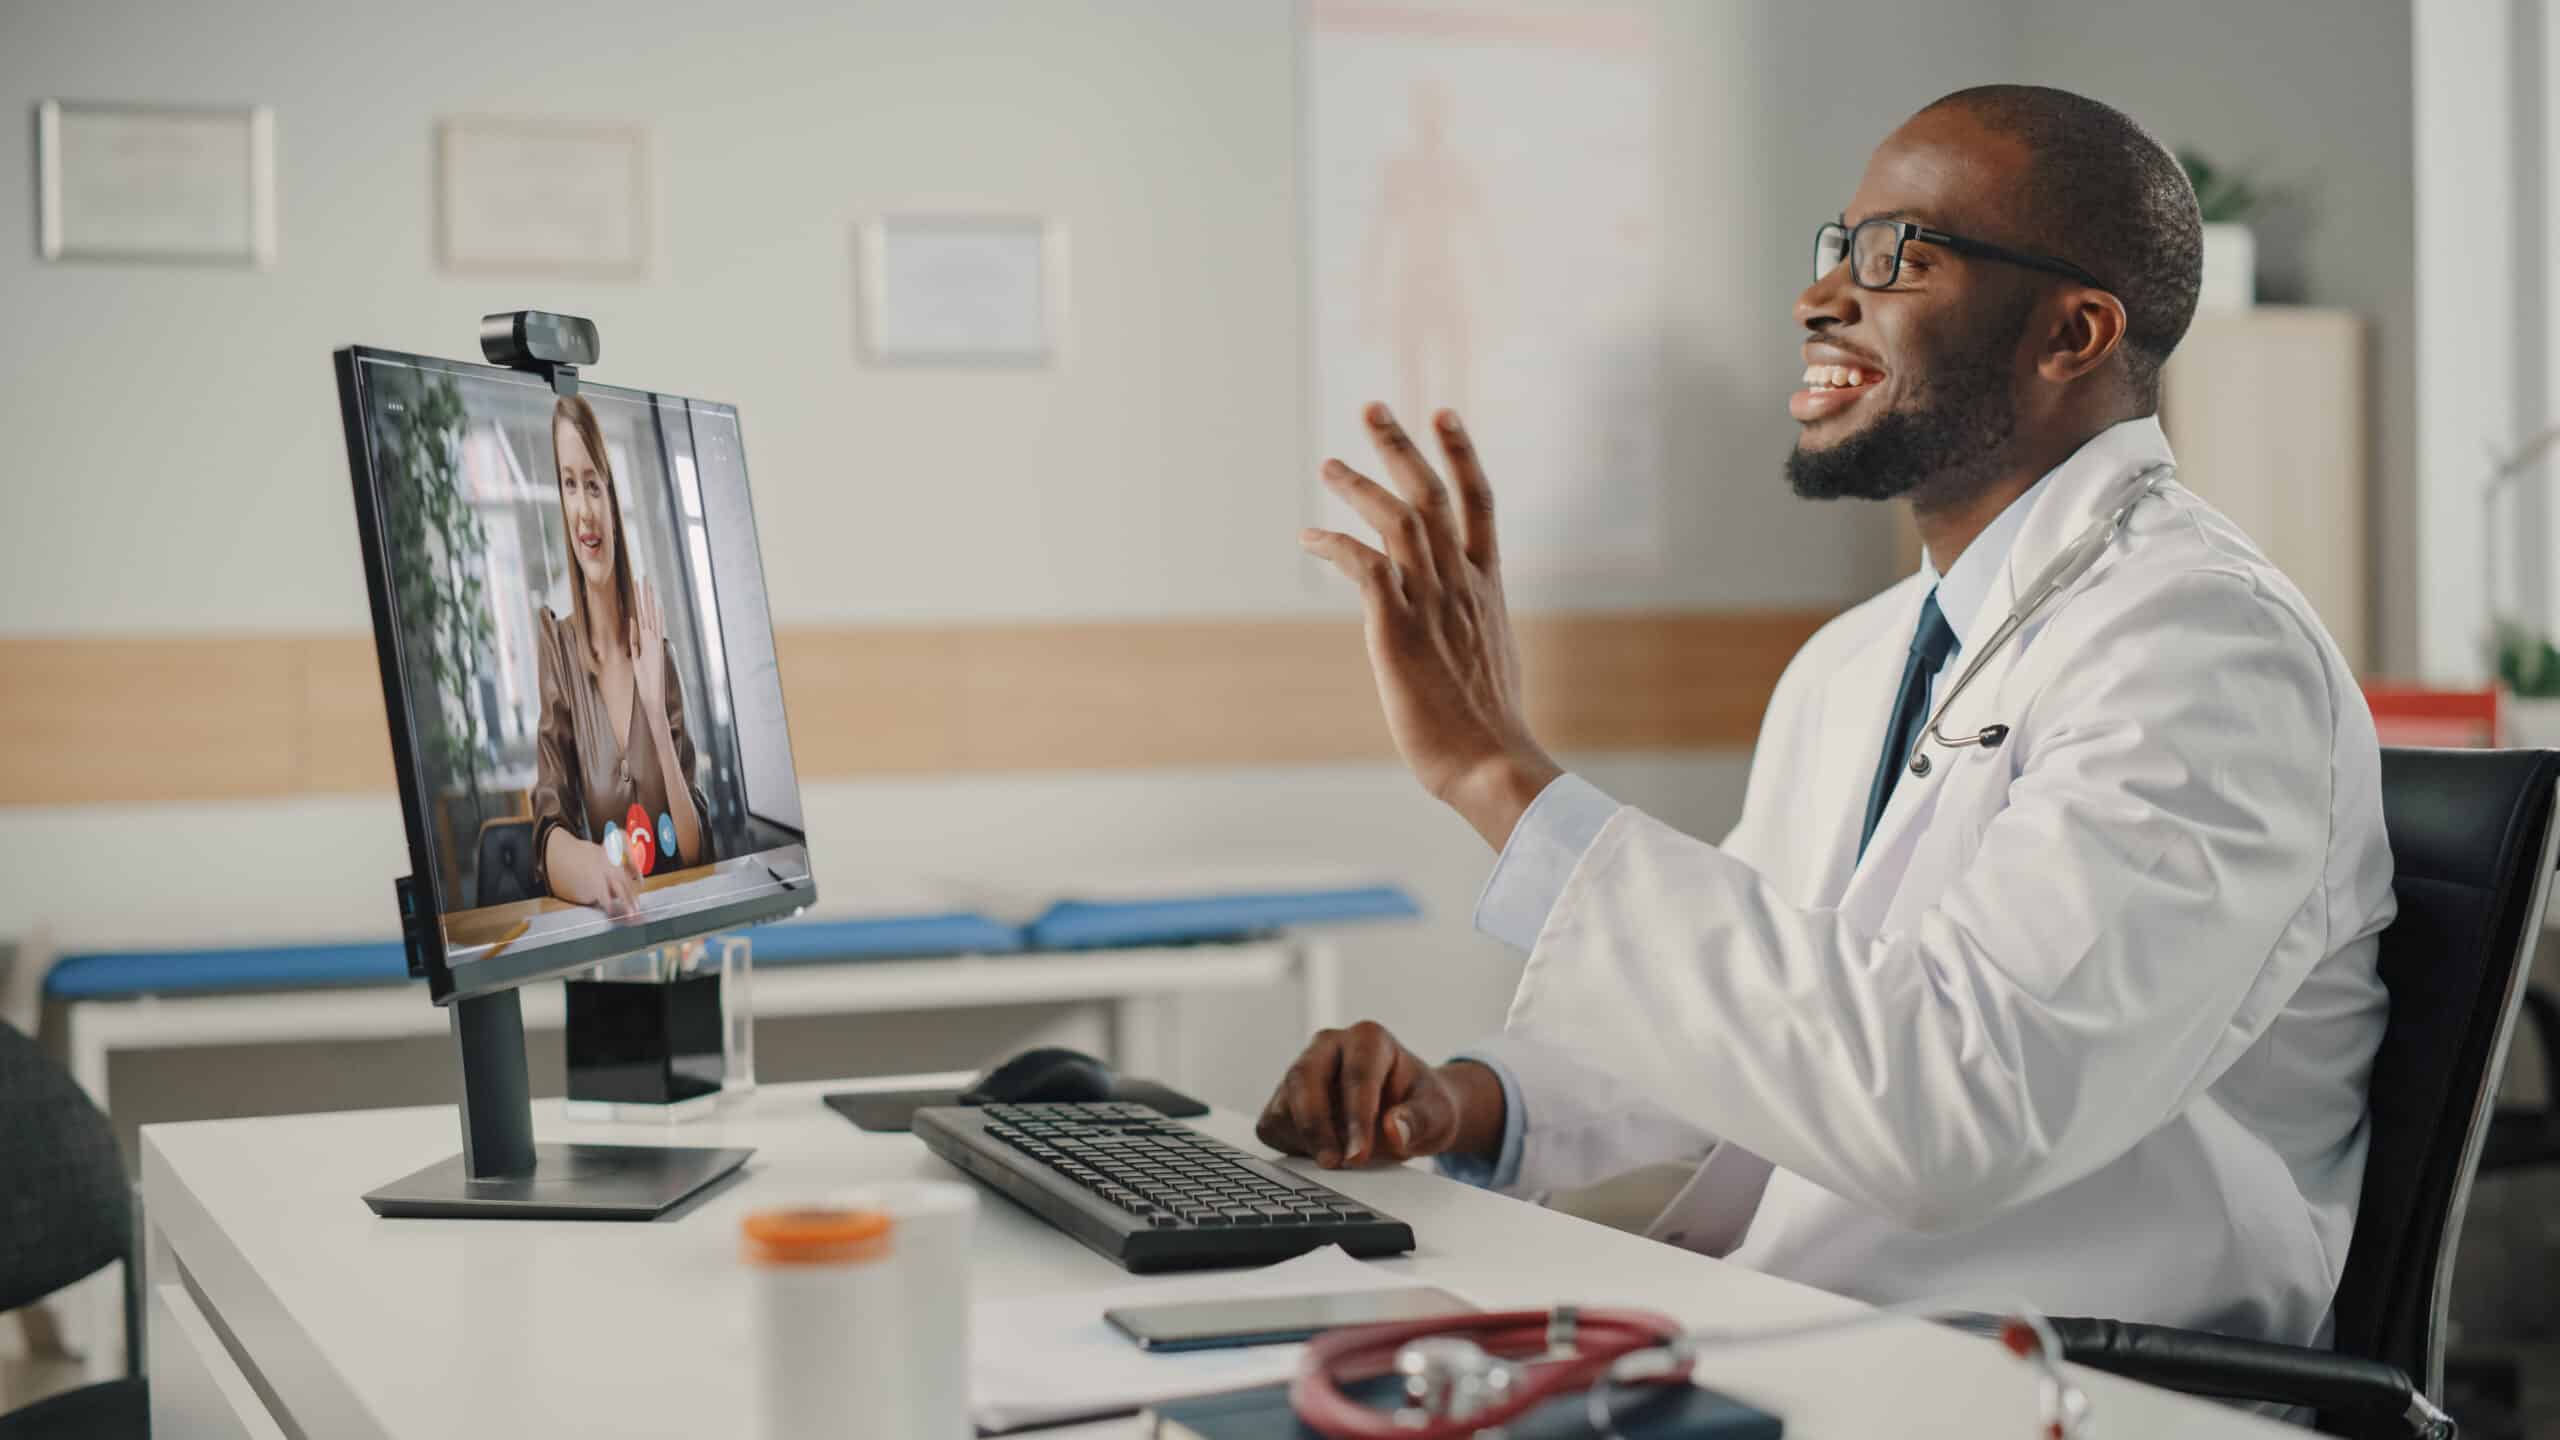 Physician is Making a Video Call with a Female Patient on Desktop Computer